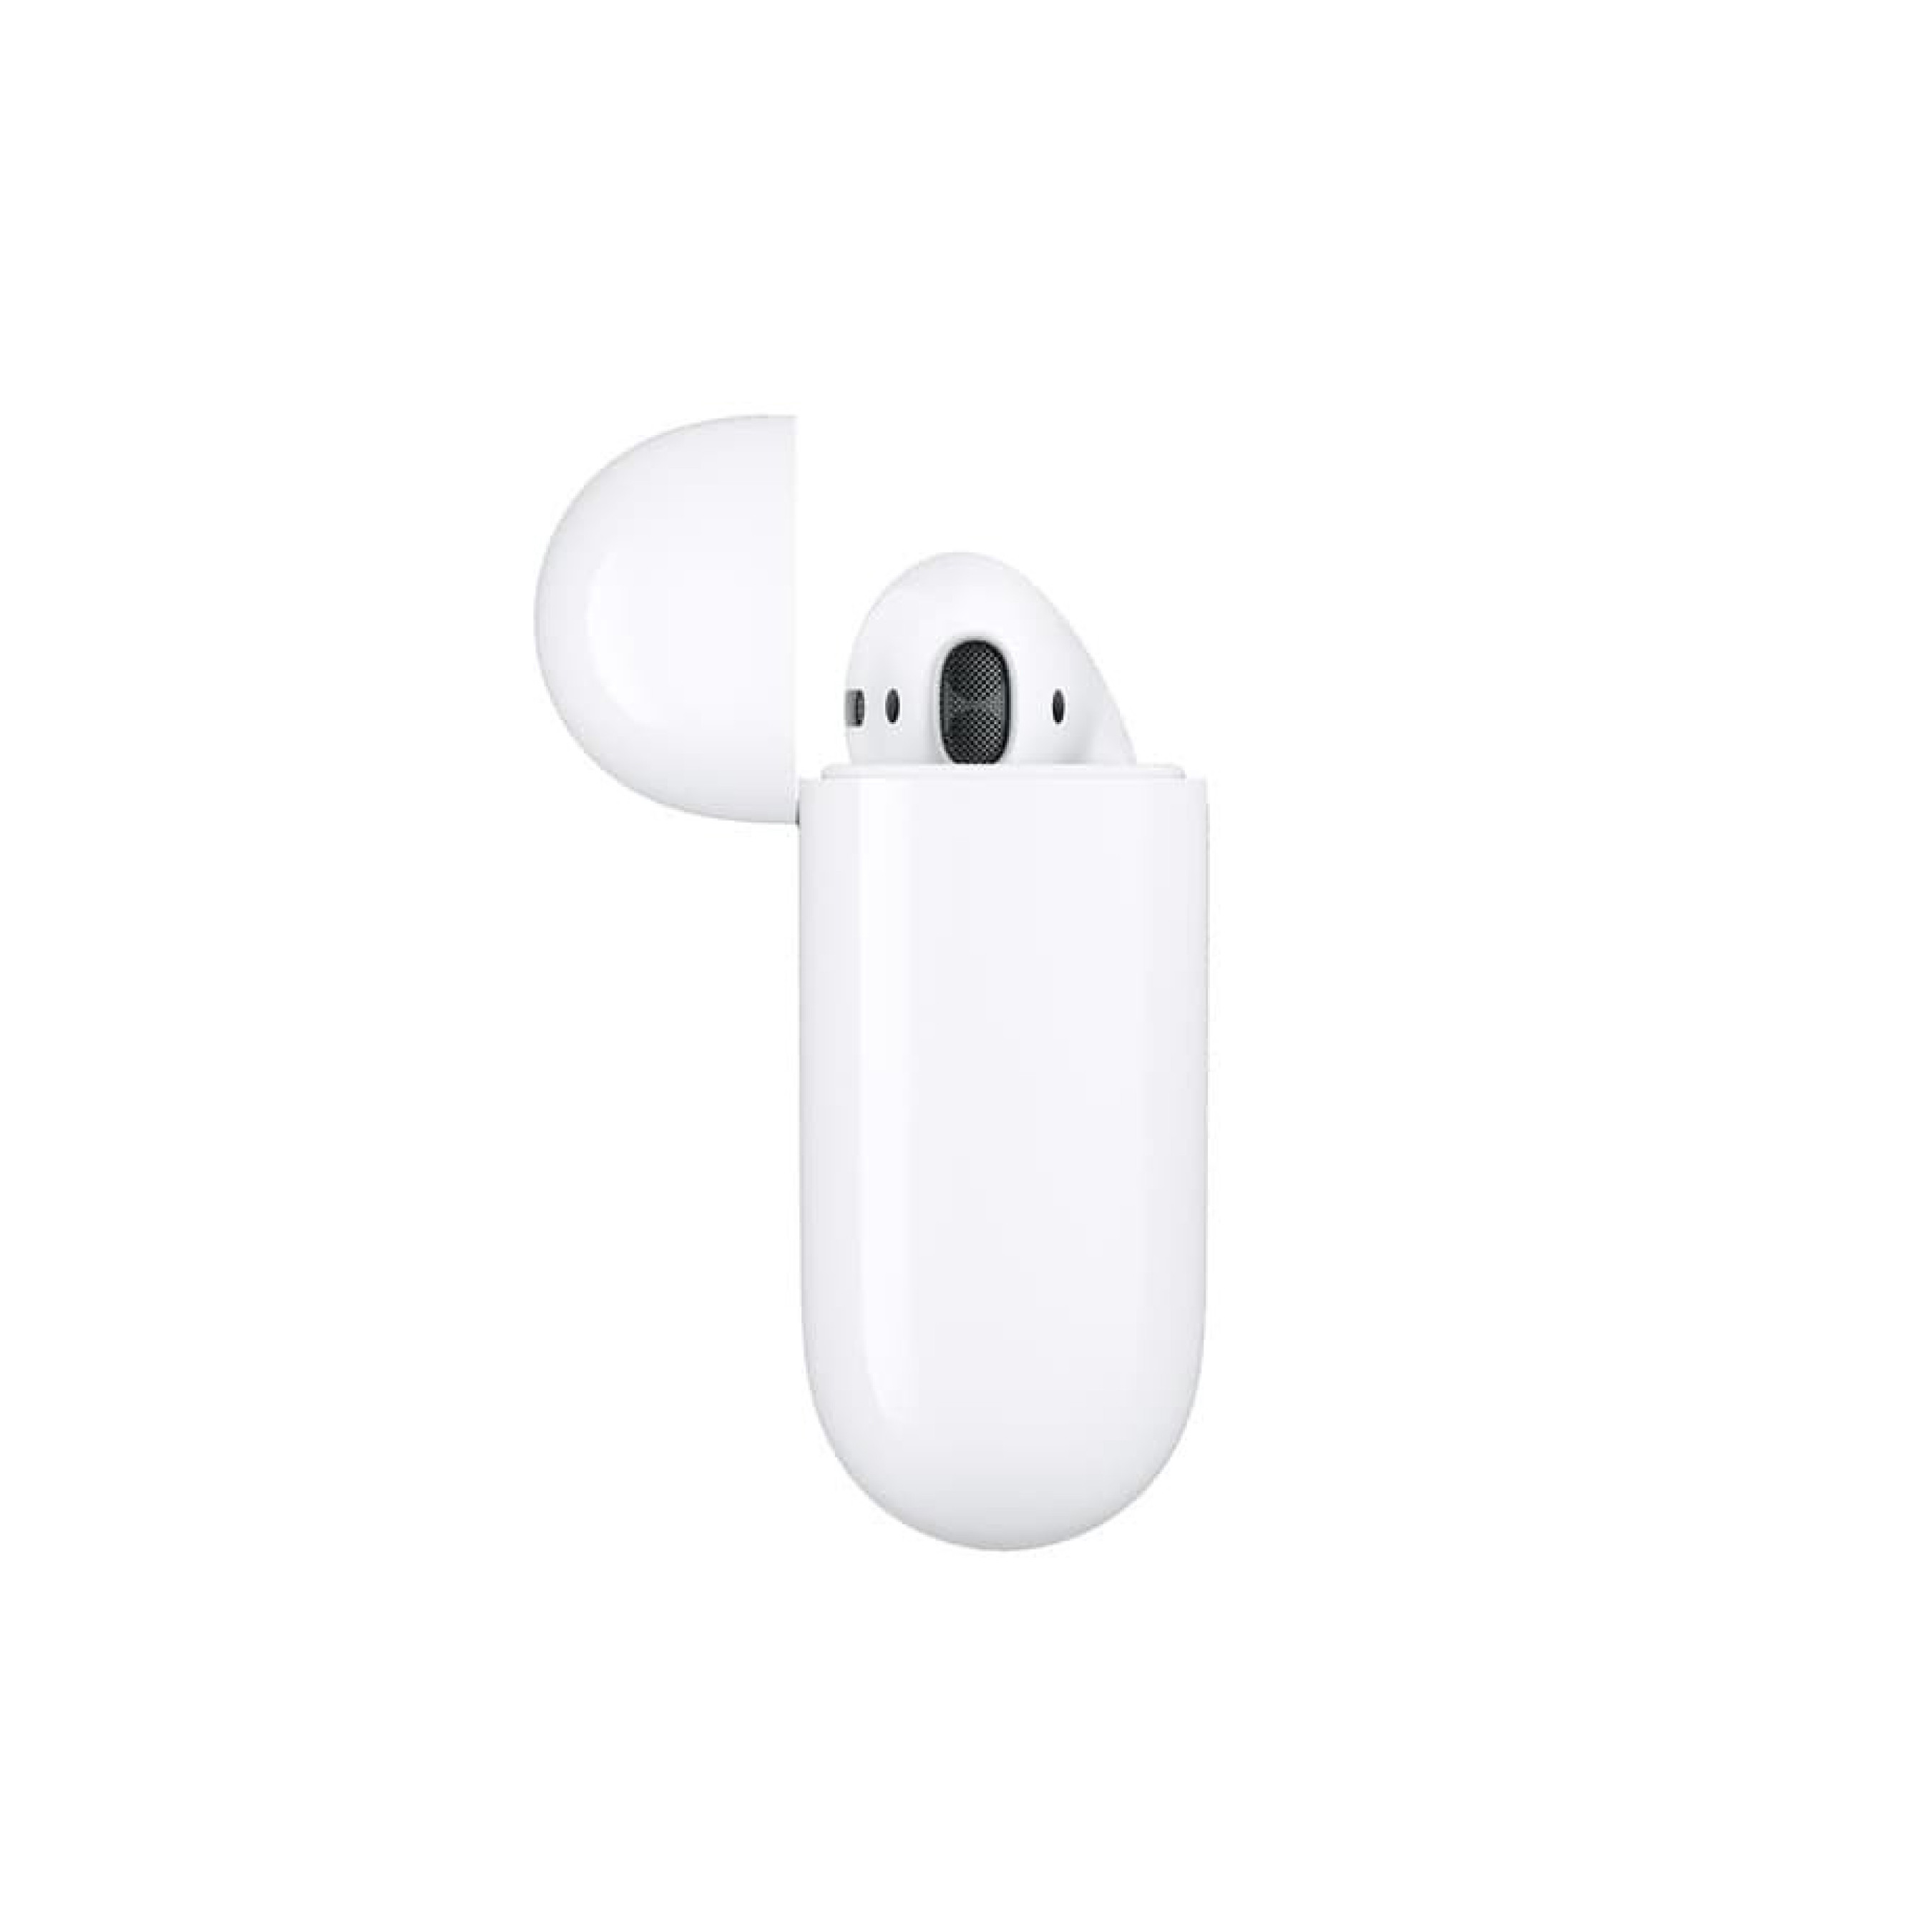 Apple Airpods 2 With Charging Case MV7N2 - White TAM